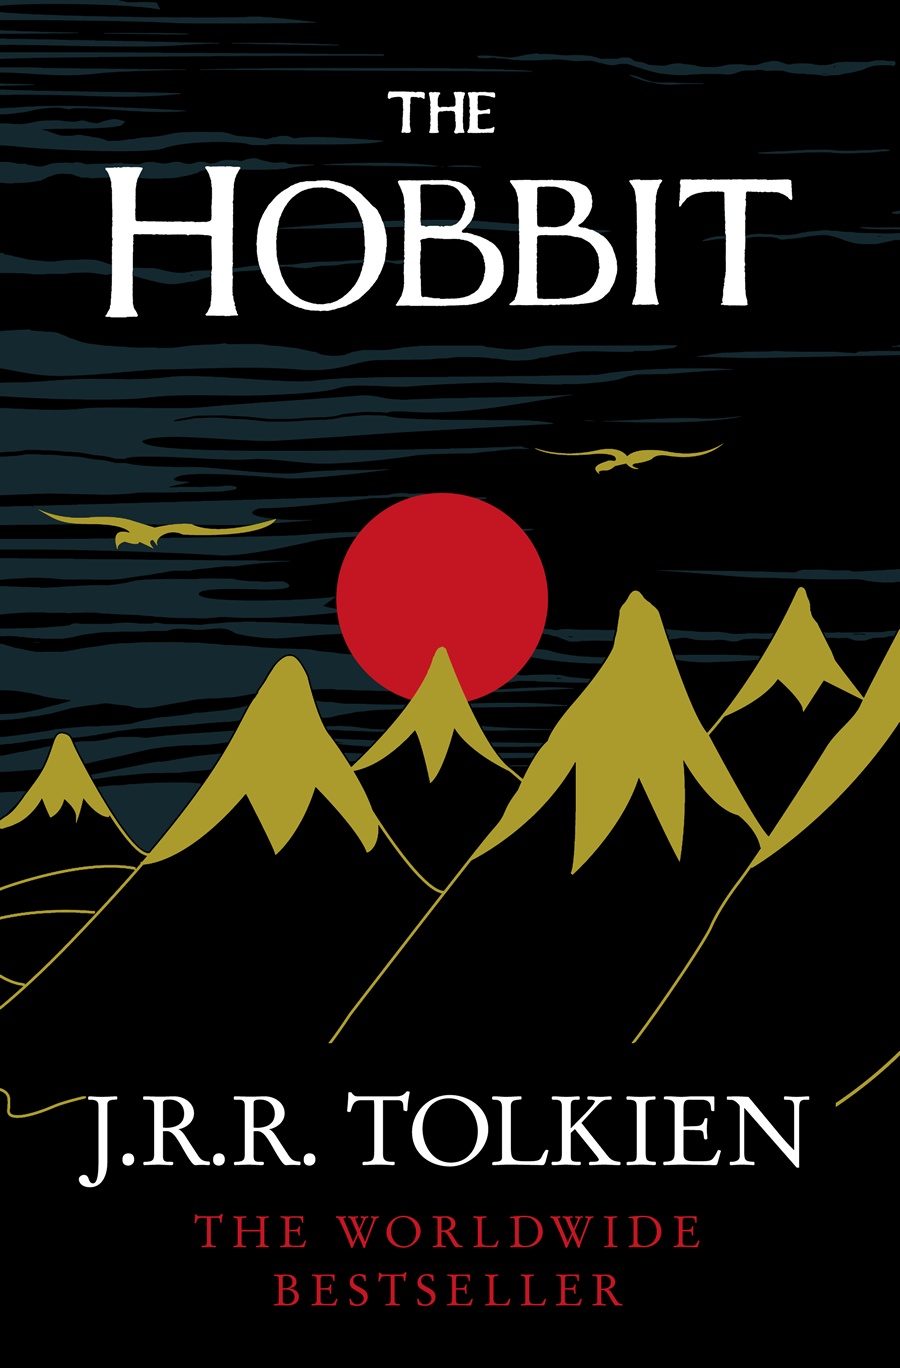 The Hobbit, by J.R.R. Tolkien - book to read 